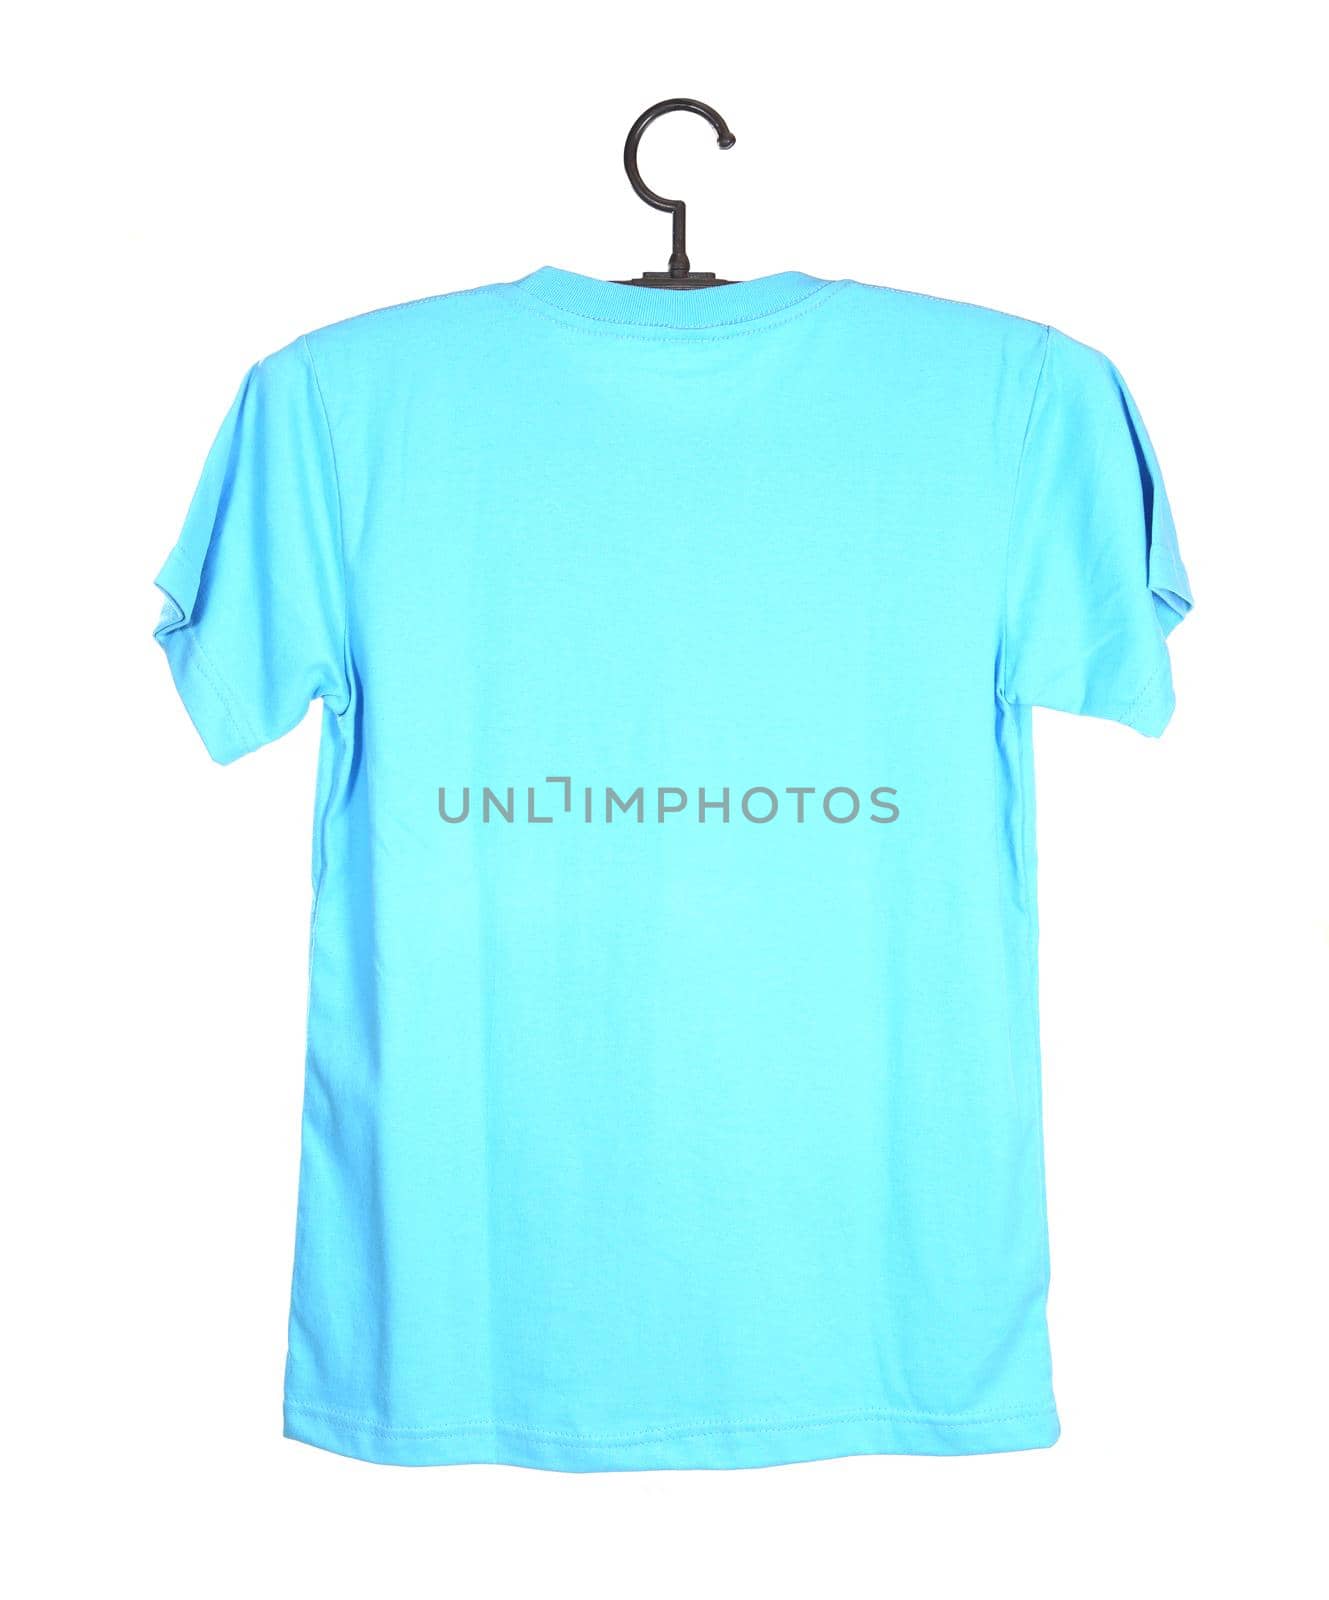 blue t-shirt template on hanger (back side) isolated on white background